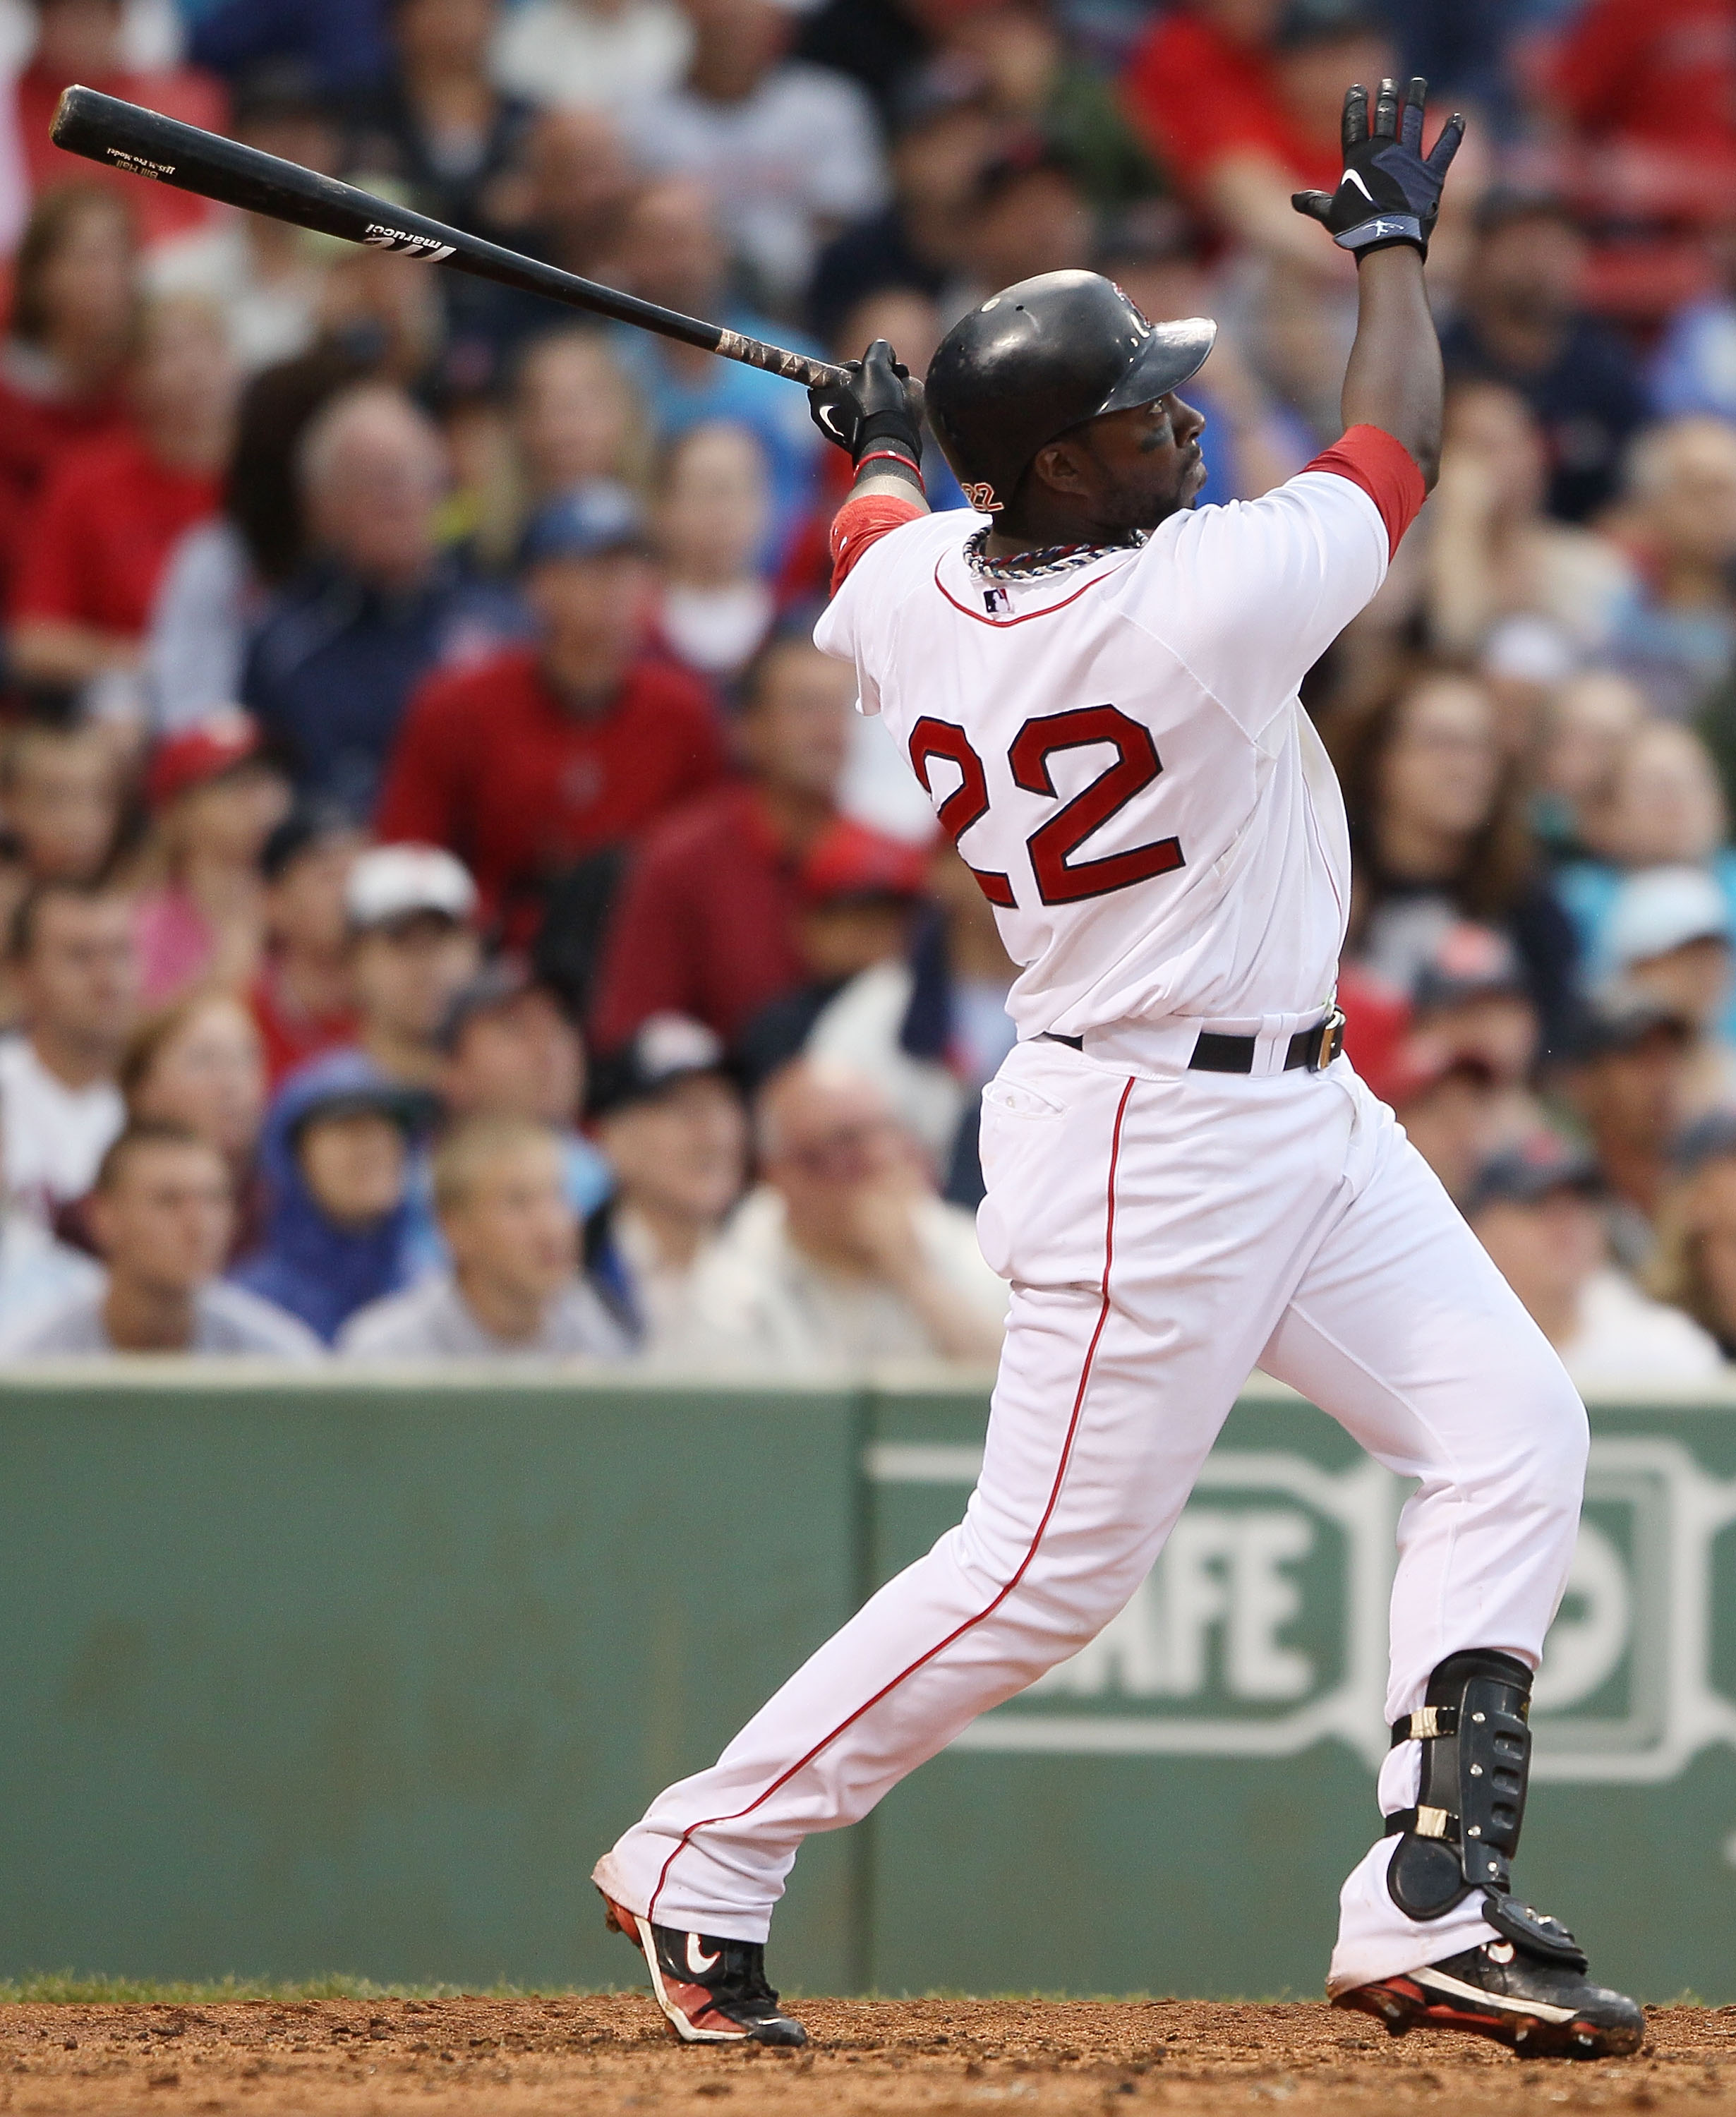 BOSTON - AUGUST 22:  Bill Hall #22 of the Boston Red Sox hits a two run homer in the fifth inning against the Toronto Blue Jays on August 22, 2010 at Fenway Park in Boston, Massachusetts.  (Photo by Elsa/Getty Images)